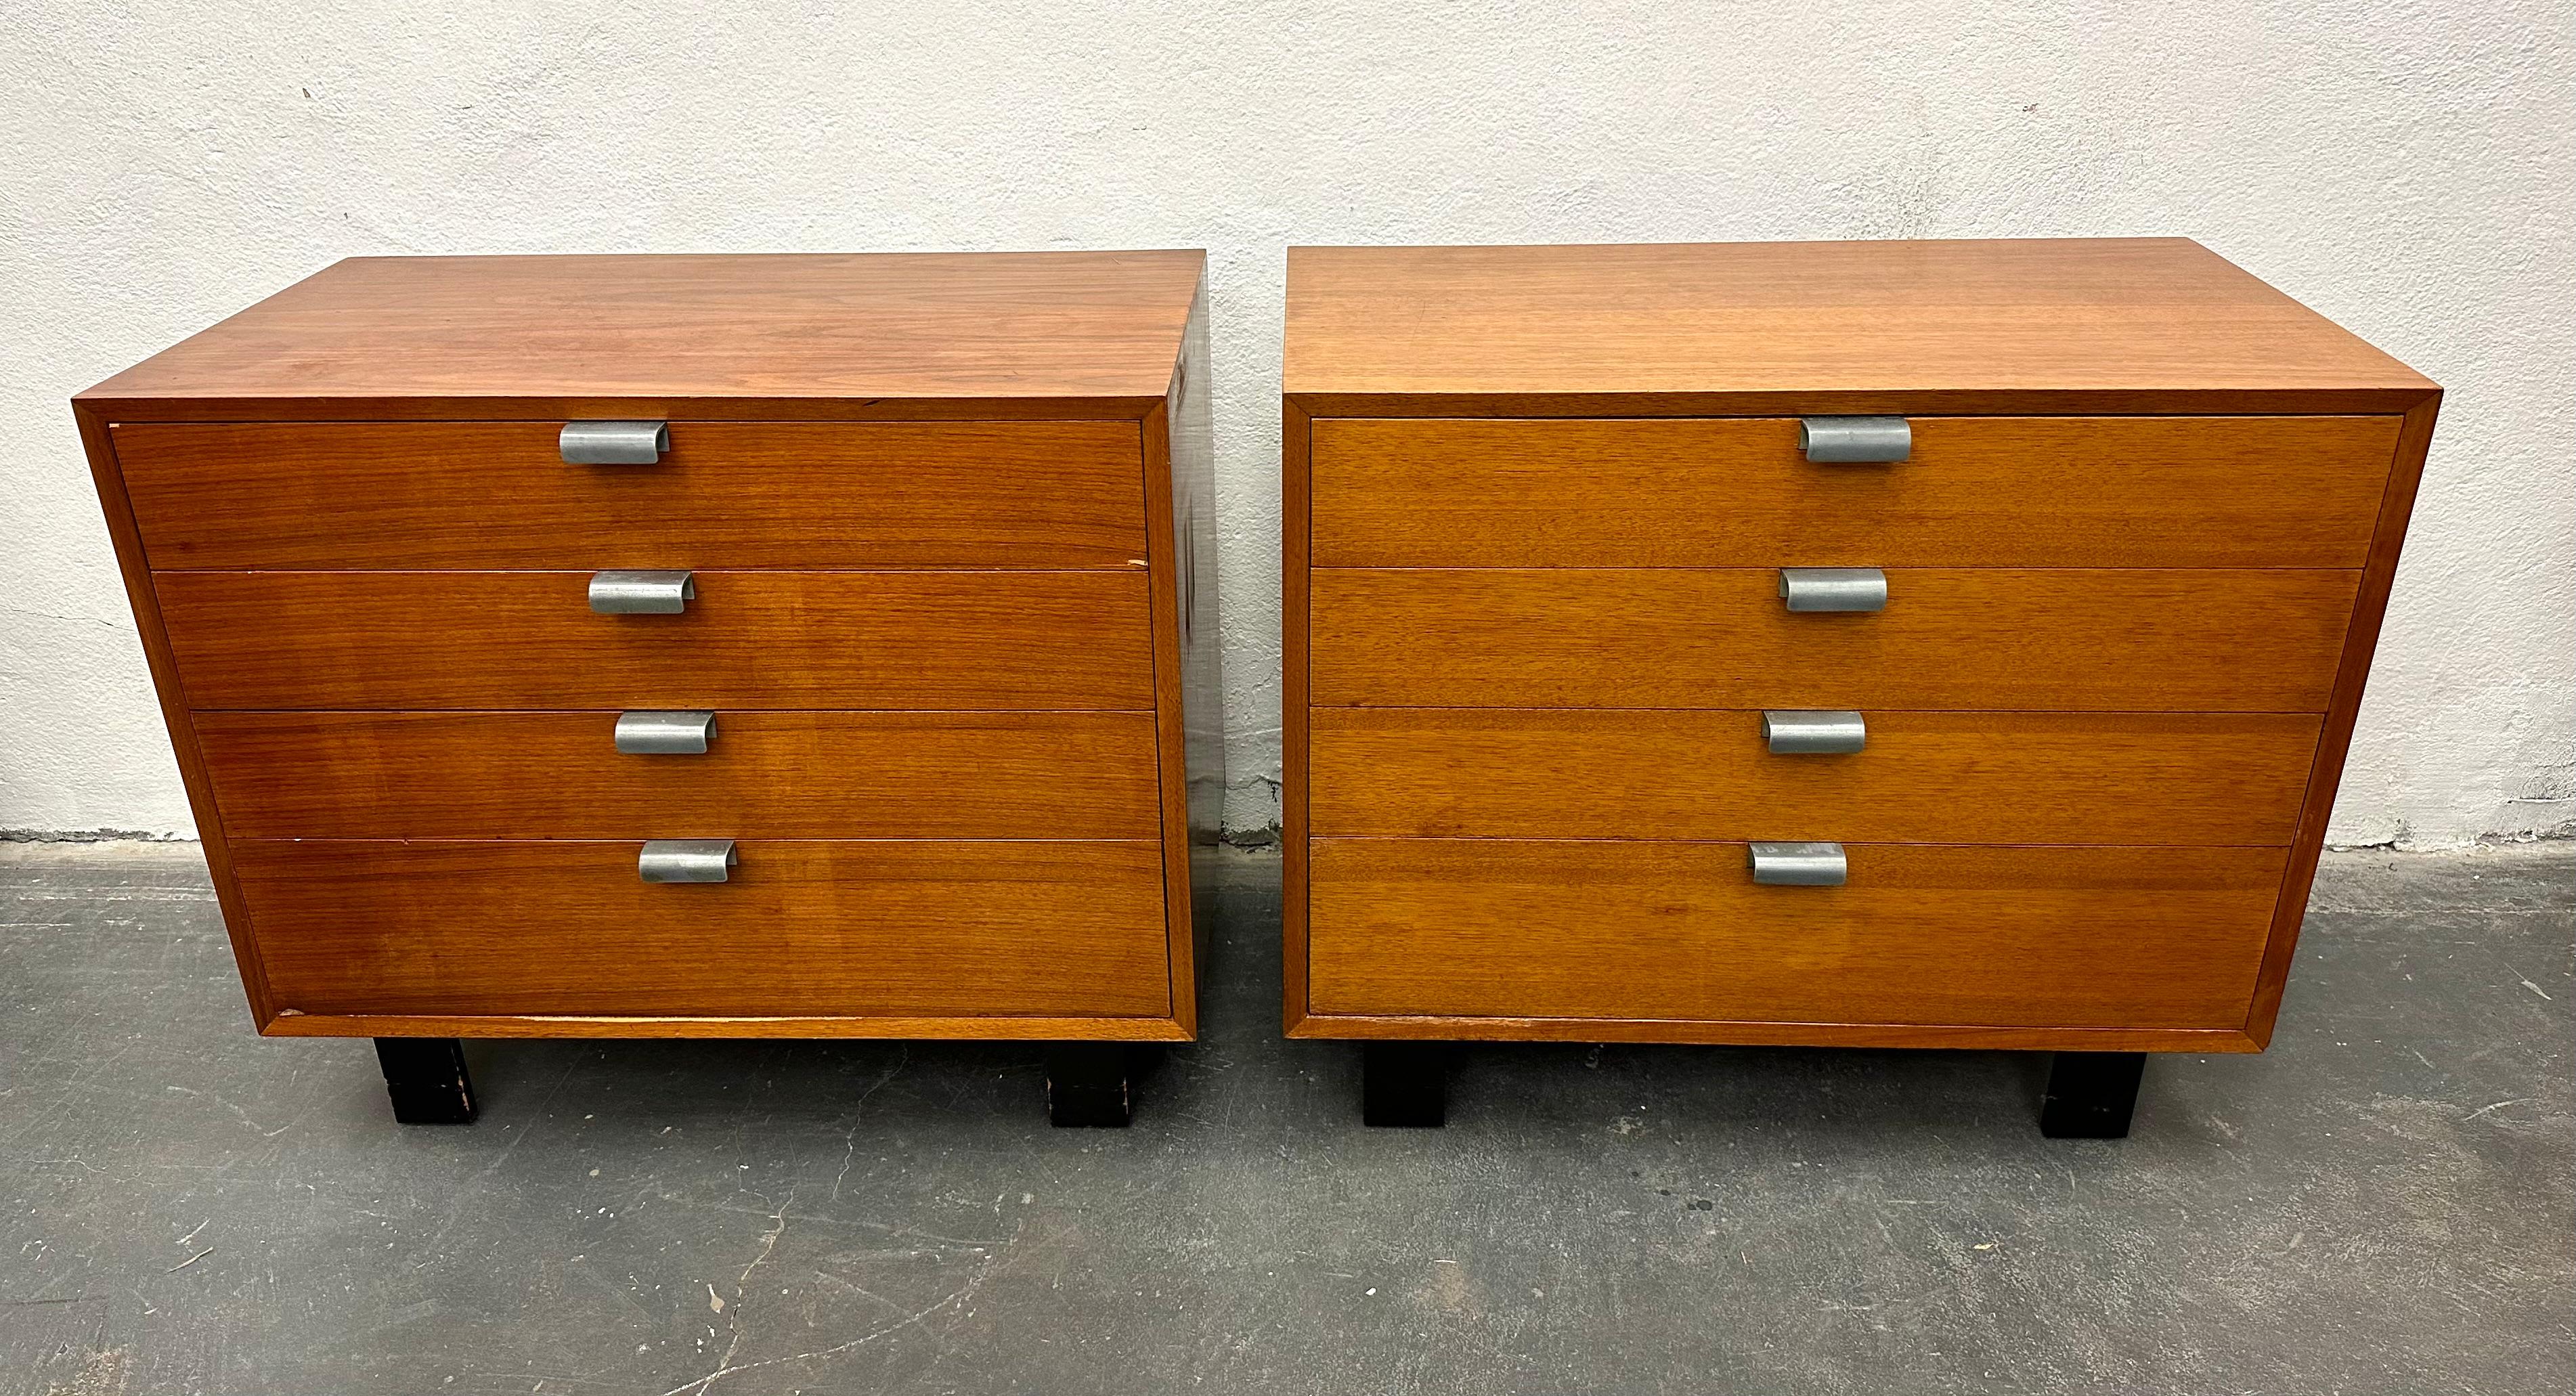 Simple elegant modern walnut chest of drawers with ebonized wood legs and aluminum pulls, c. 1950. The original finish has a warm patina and even color. For Herman Miller, Retains aluminum foil manufacturers label.
 